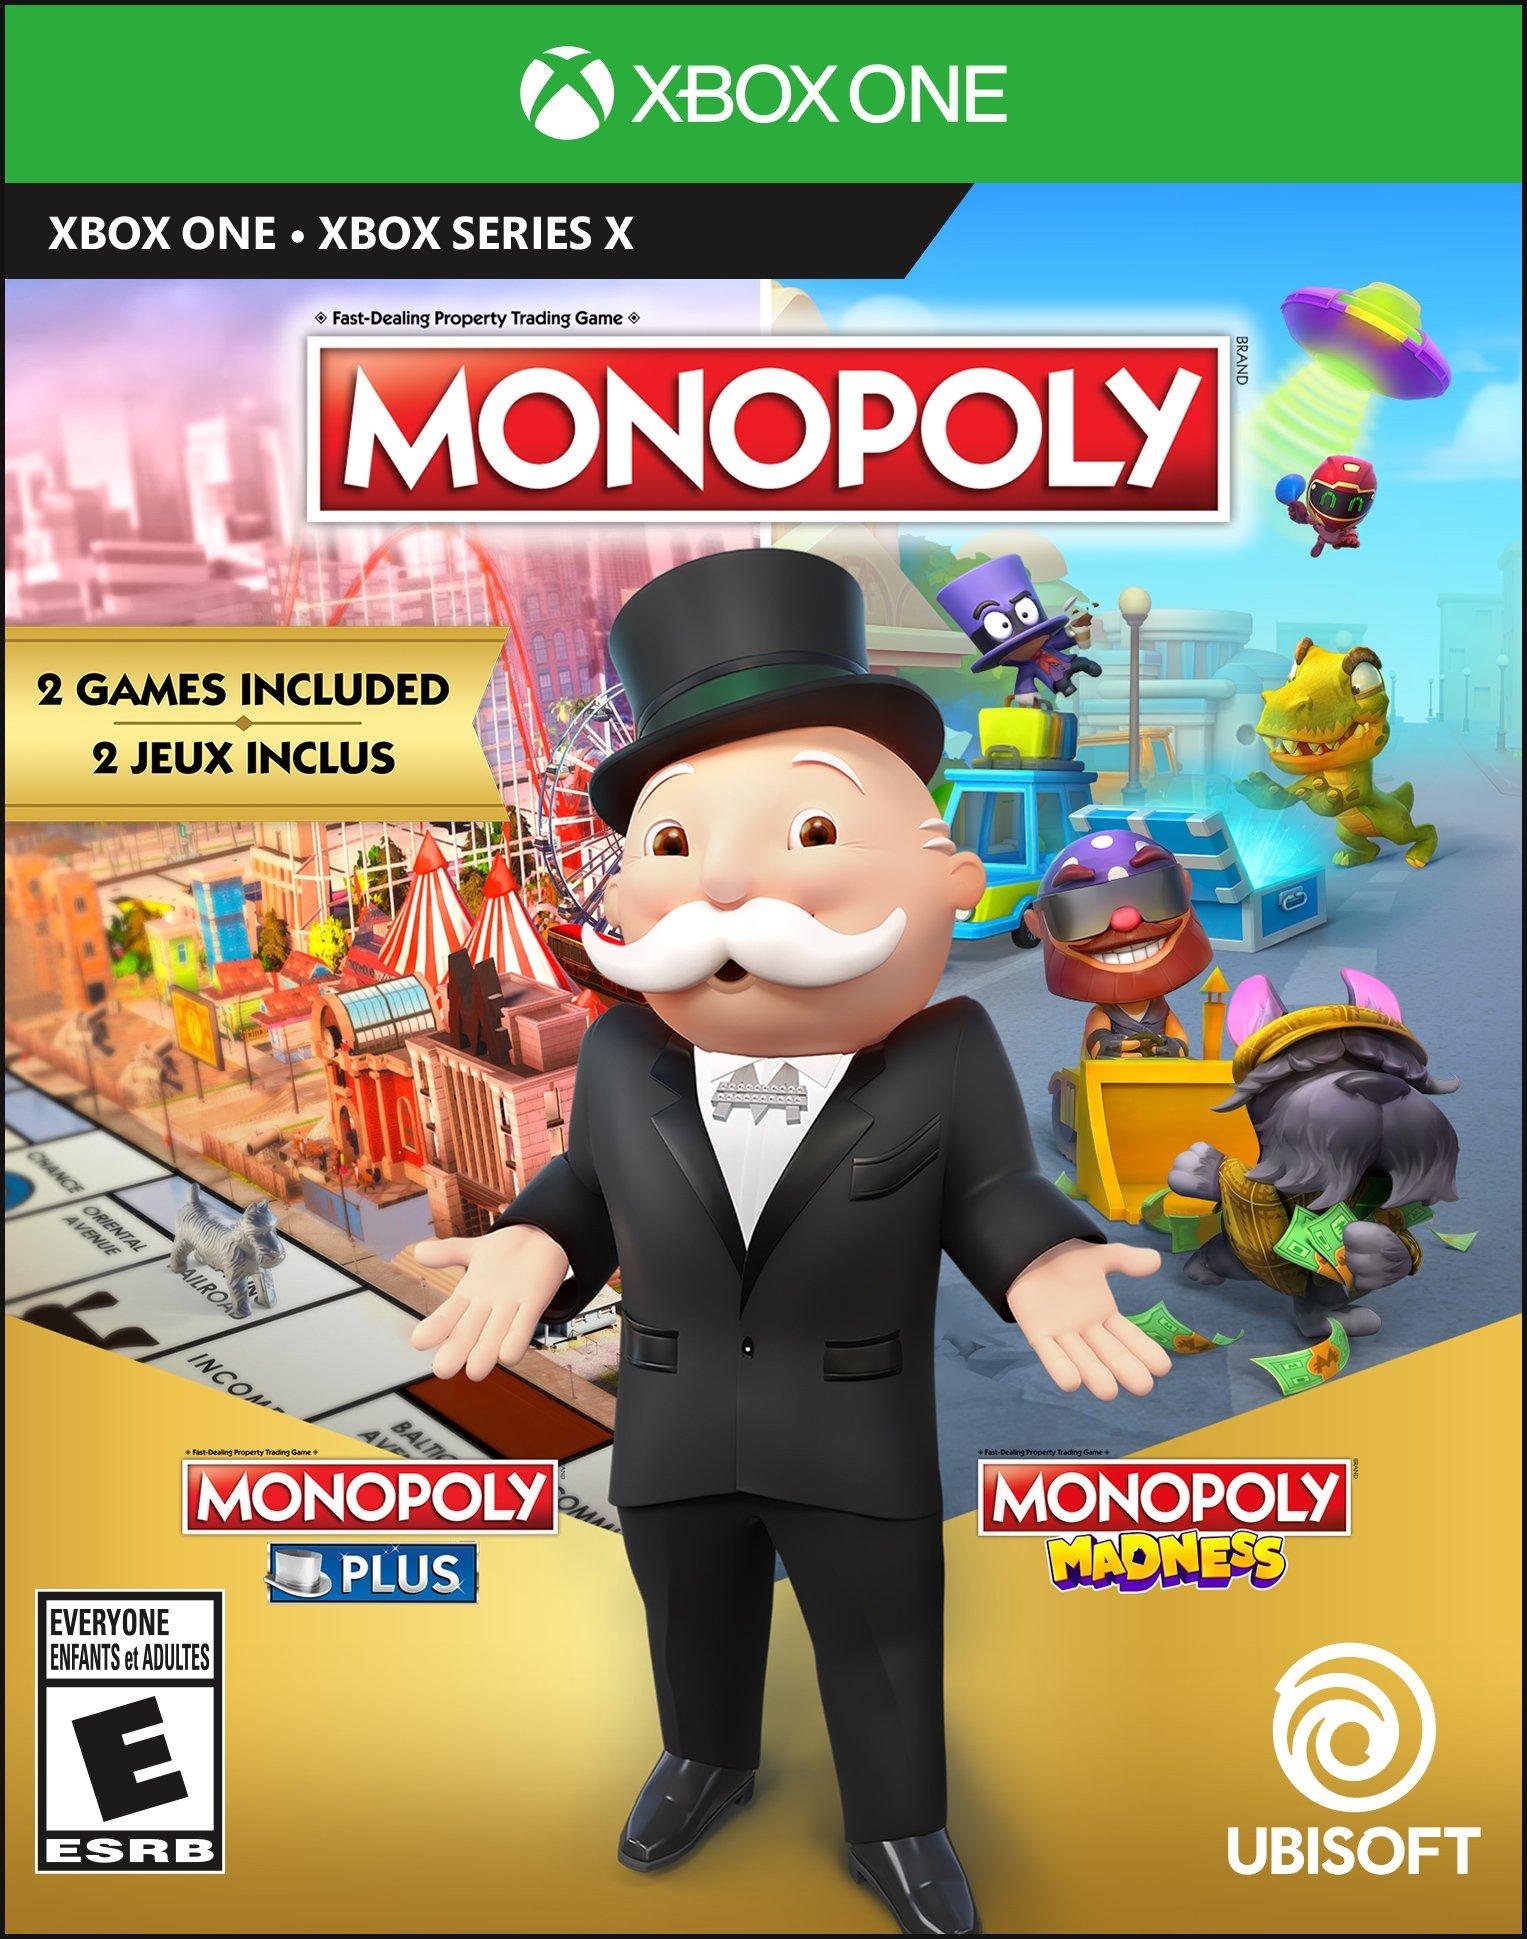 and Madness | One Plus Xbox Monopoly Xbox | GameStop Monopoly - One